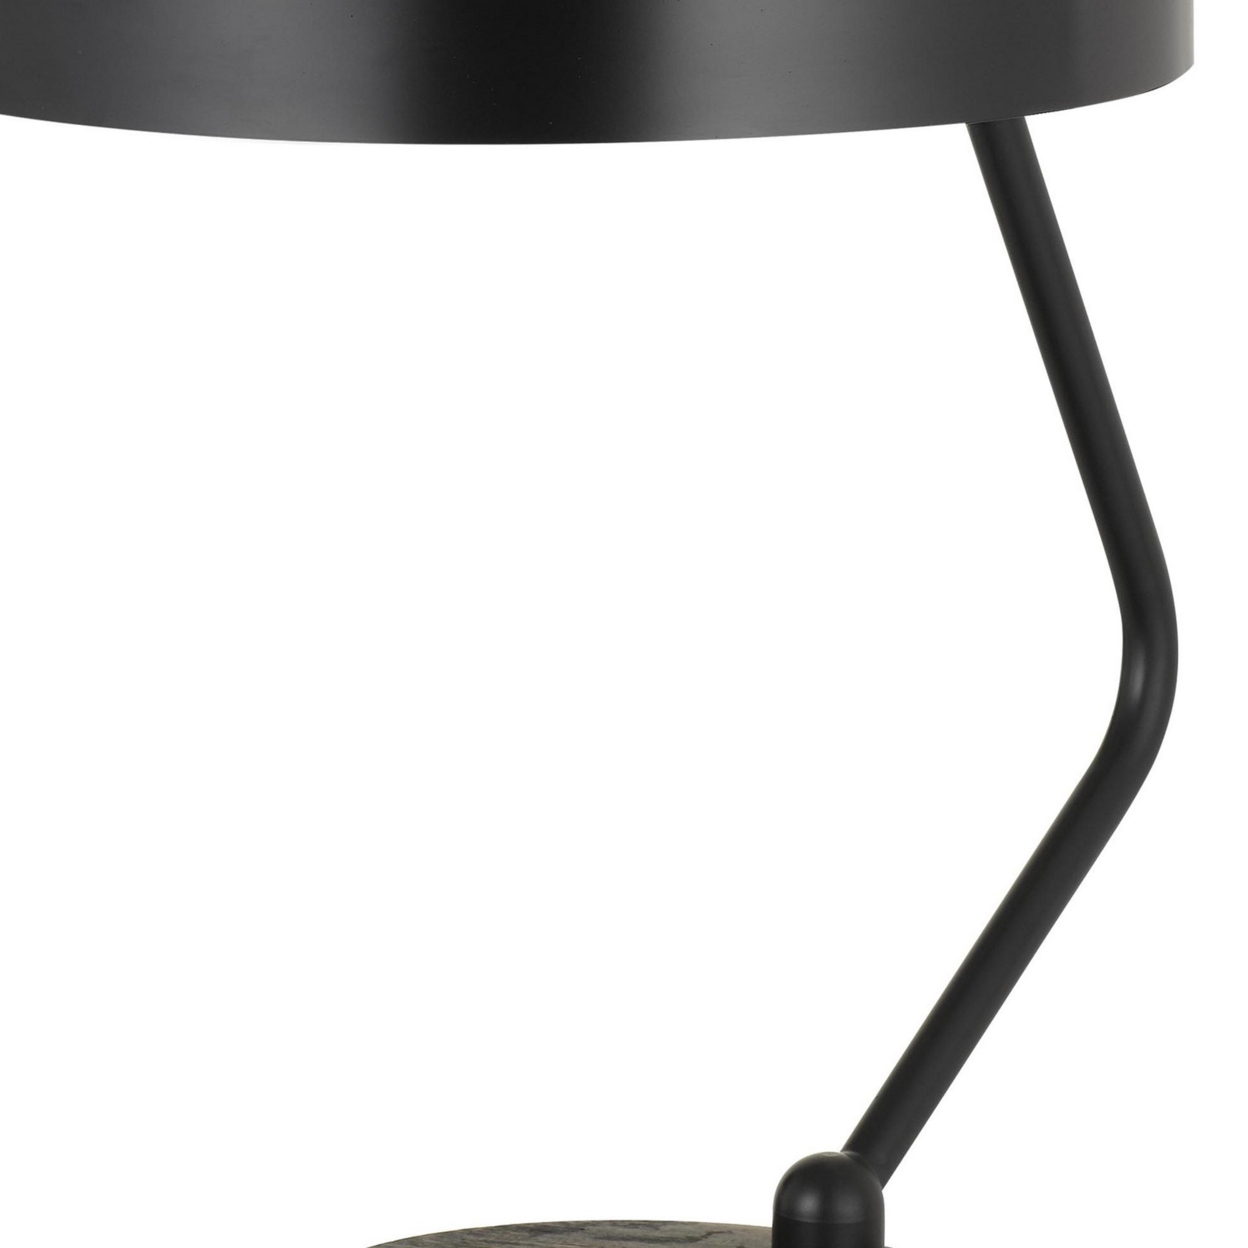 Metal Lined Fabric Shade Desk Lamp With Wooden Base, Beige And Black- Saltoro Sherpi